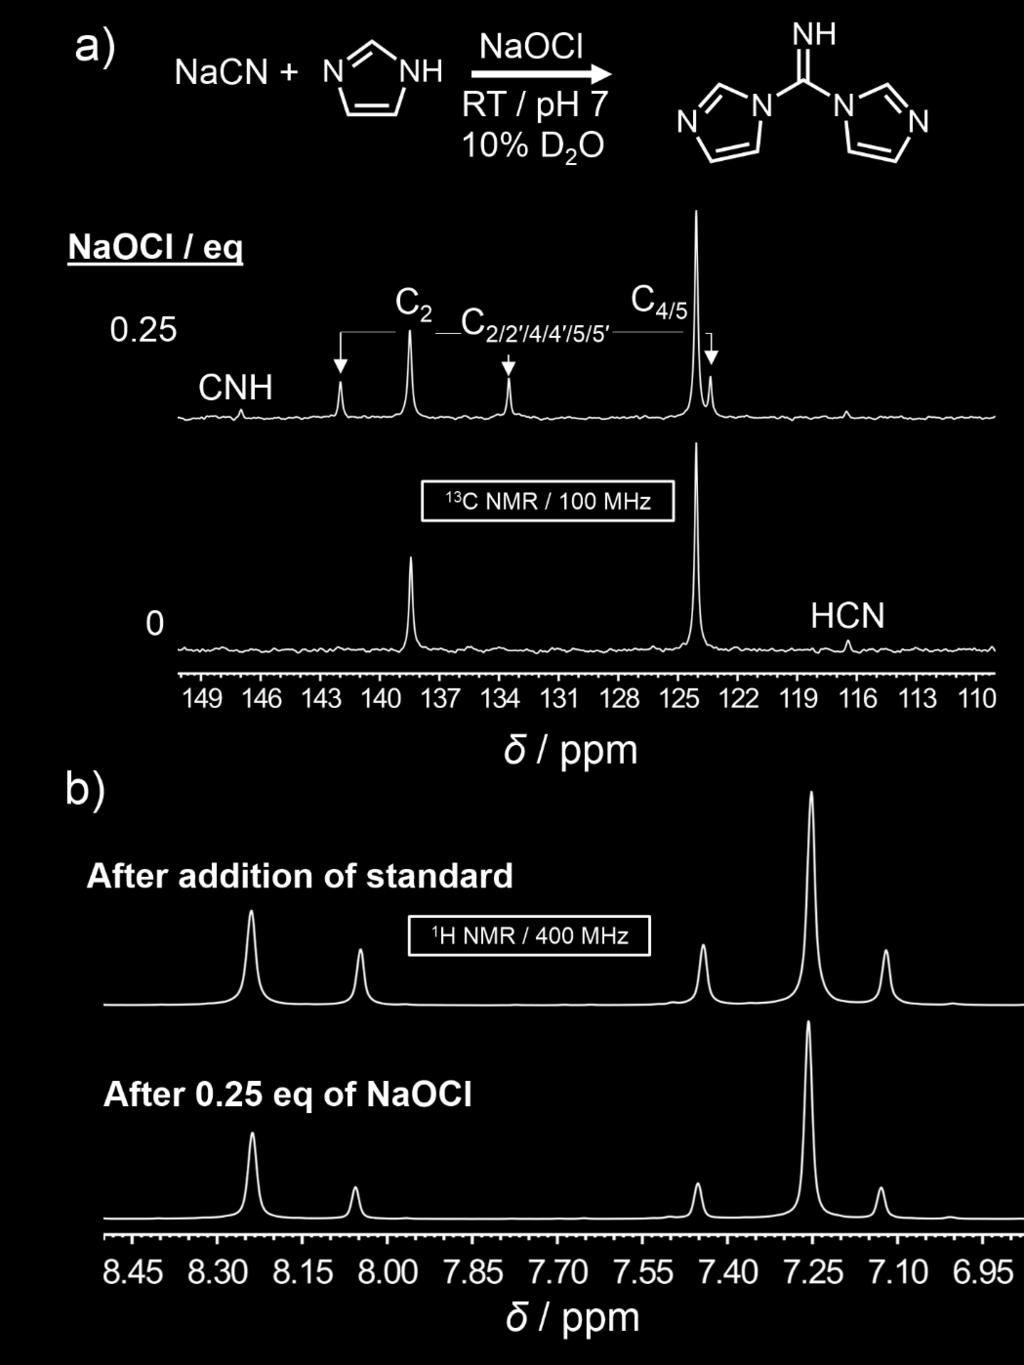 Figure S4. Carbon and proton NMR spectroscopies confirm the synthesis of Im2CNH. a) The 13 C NMR spectra of a 10% D2O solution at ph 7 containing 1 M of Im and 0.